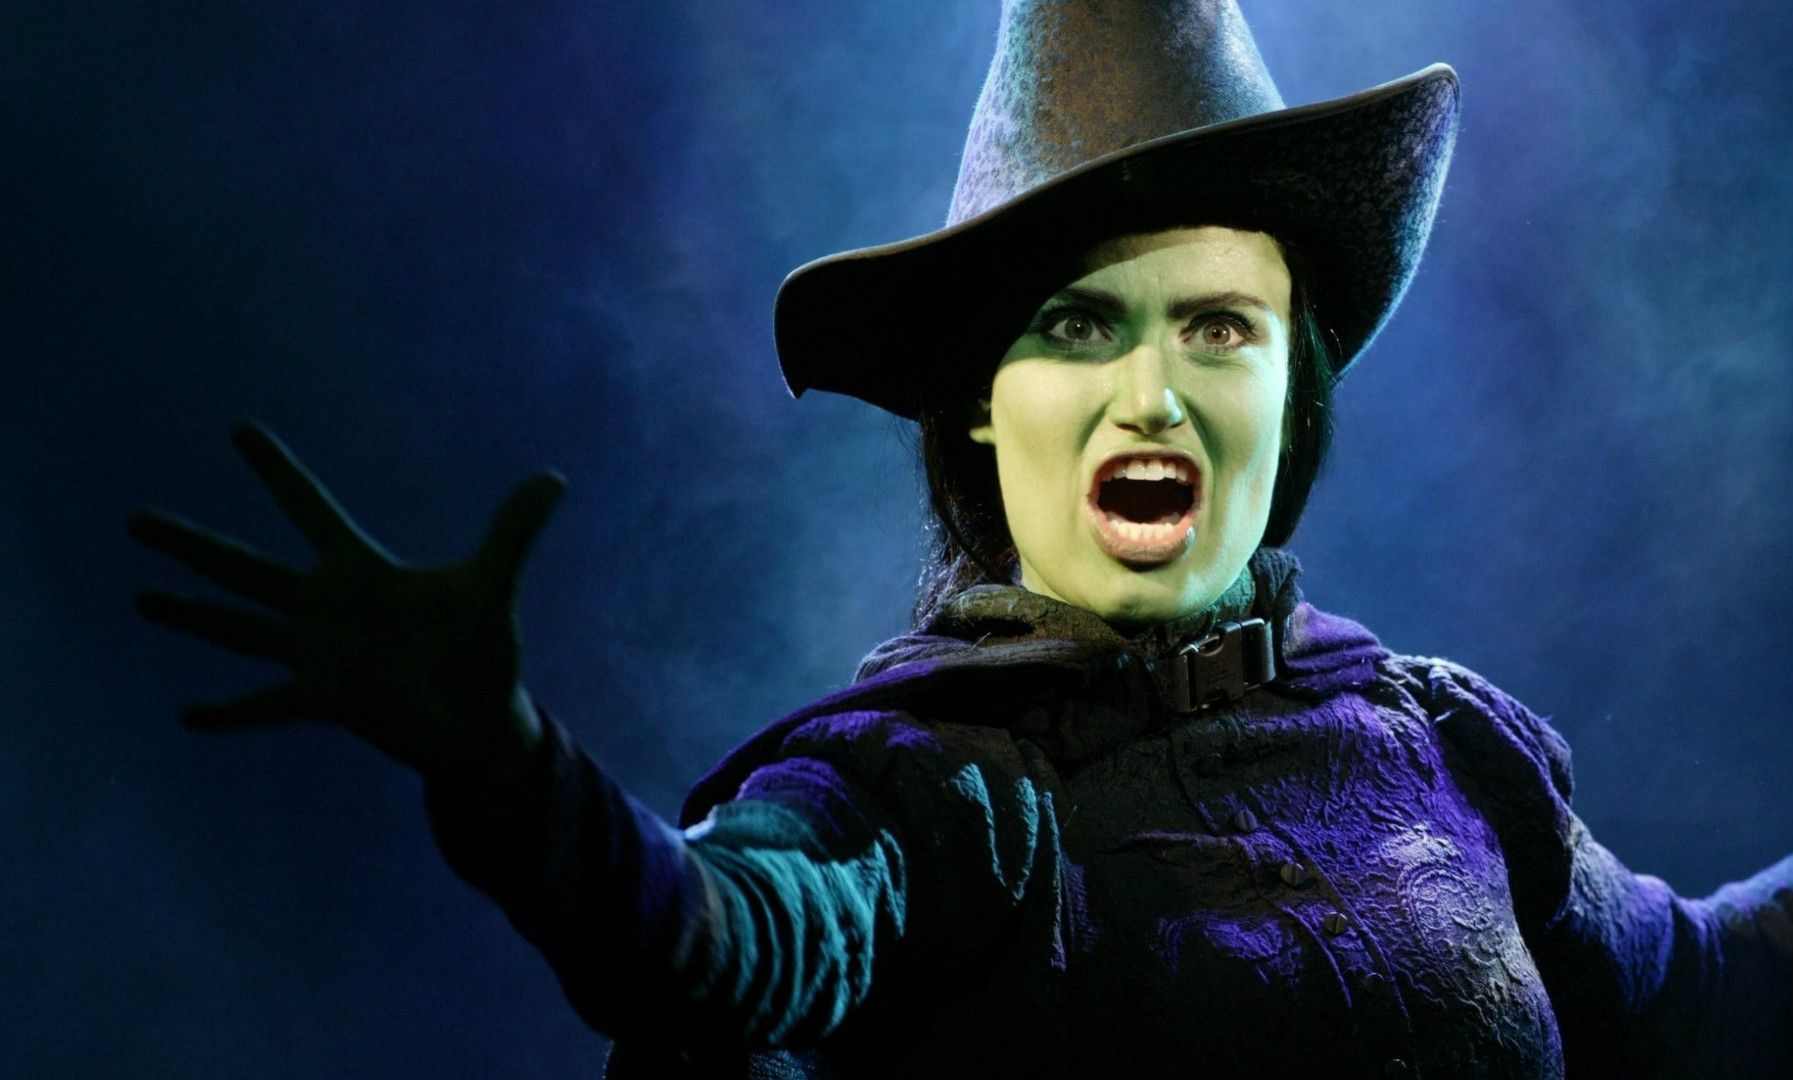 'Wicked in Concert' to air on NBC this October starring Idina Menzel and Kristin Chenoweth!